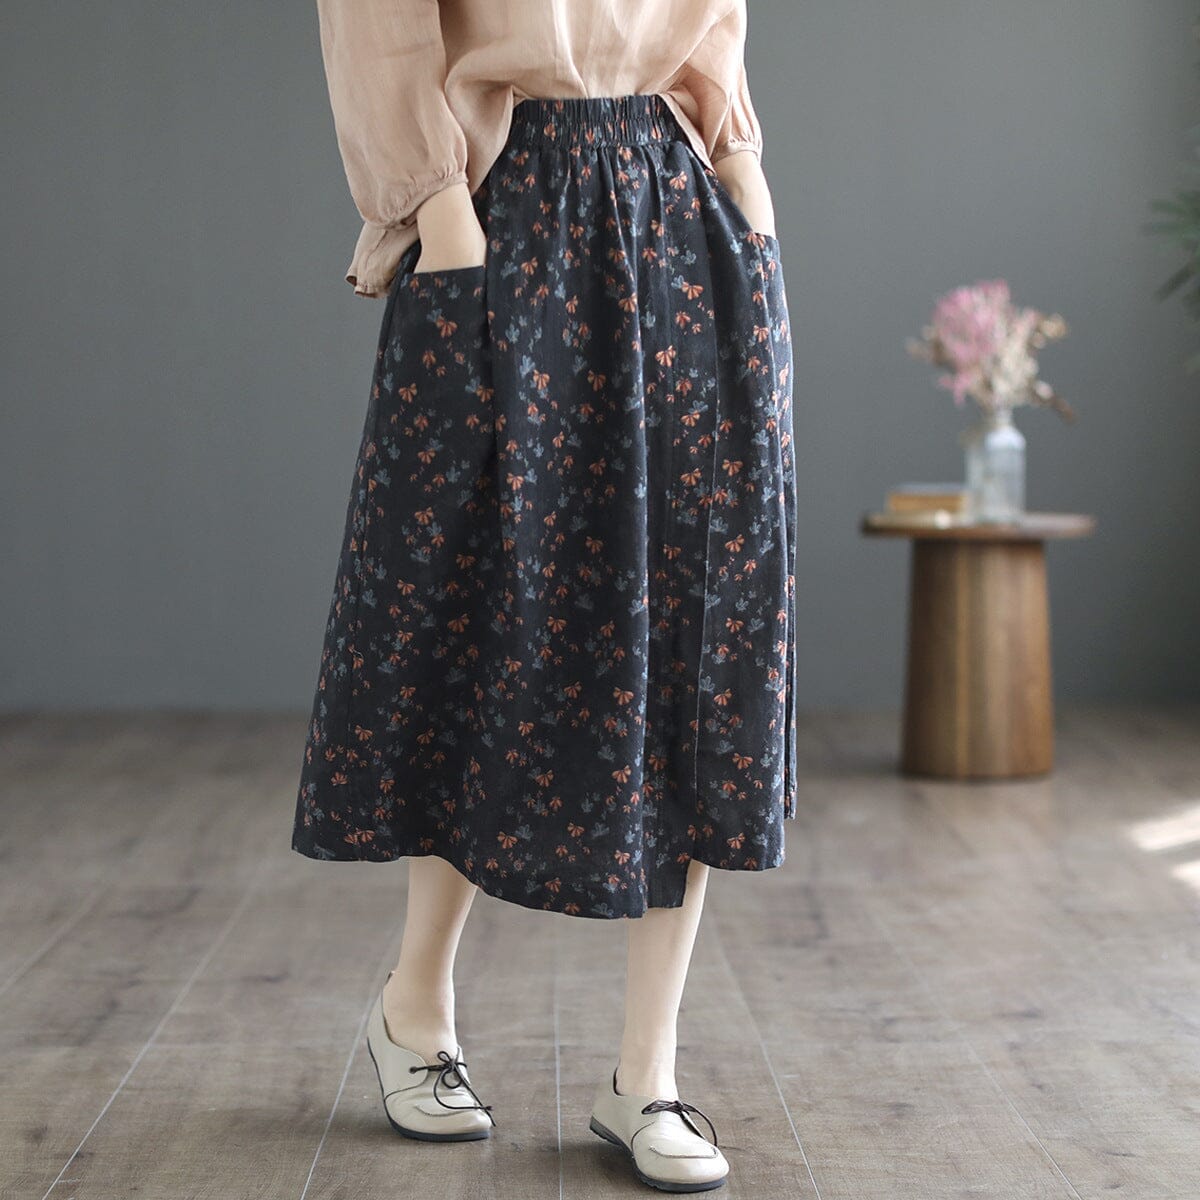 Spring Summer Retro Floral Cotton A-Line Skirt Mar 2023 New Arrival 